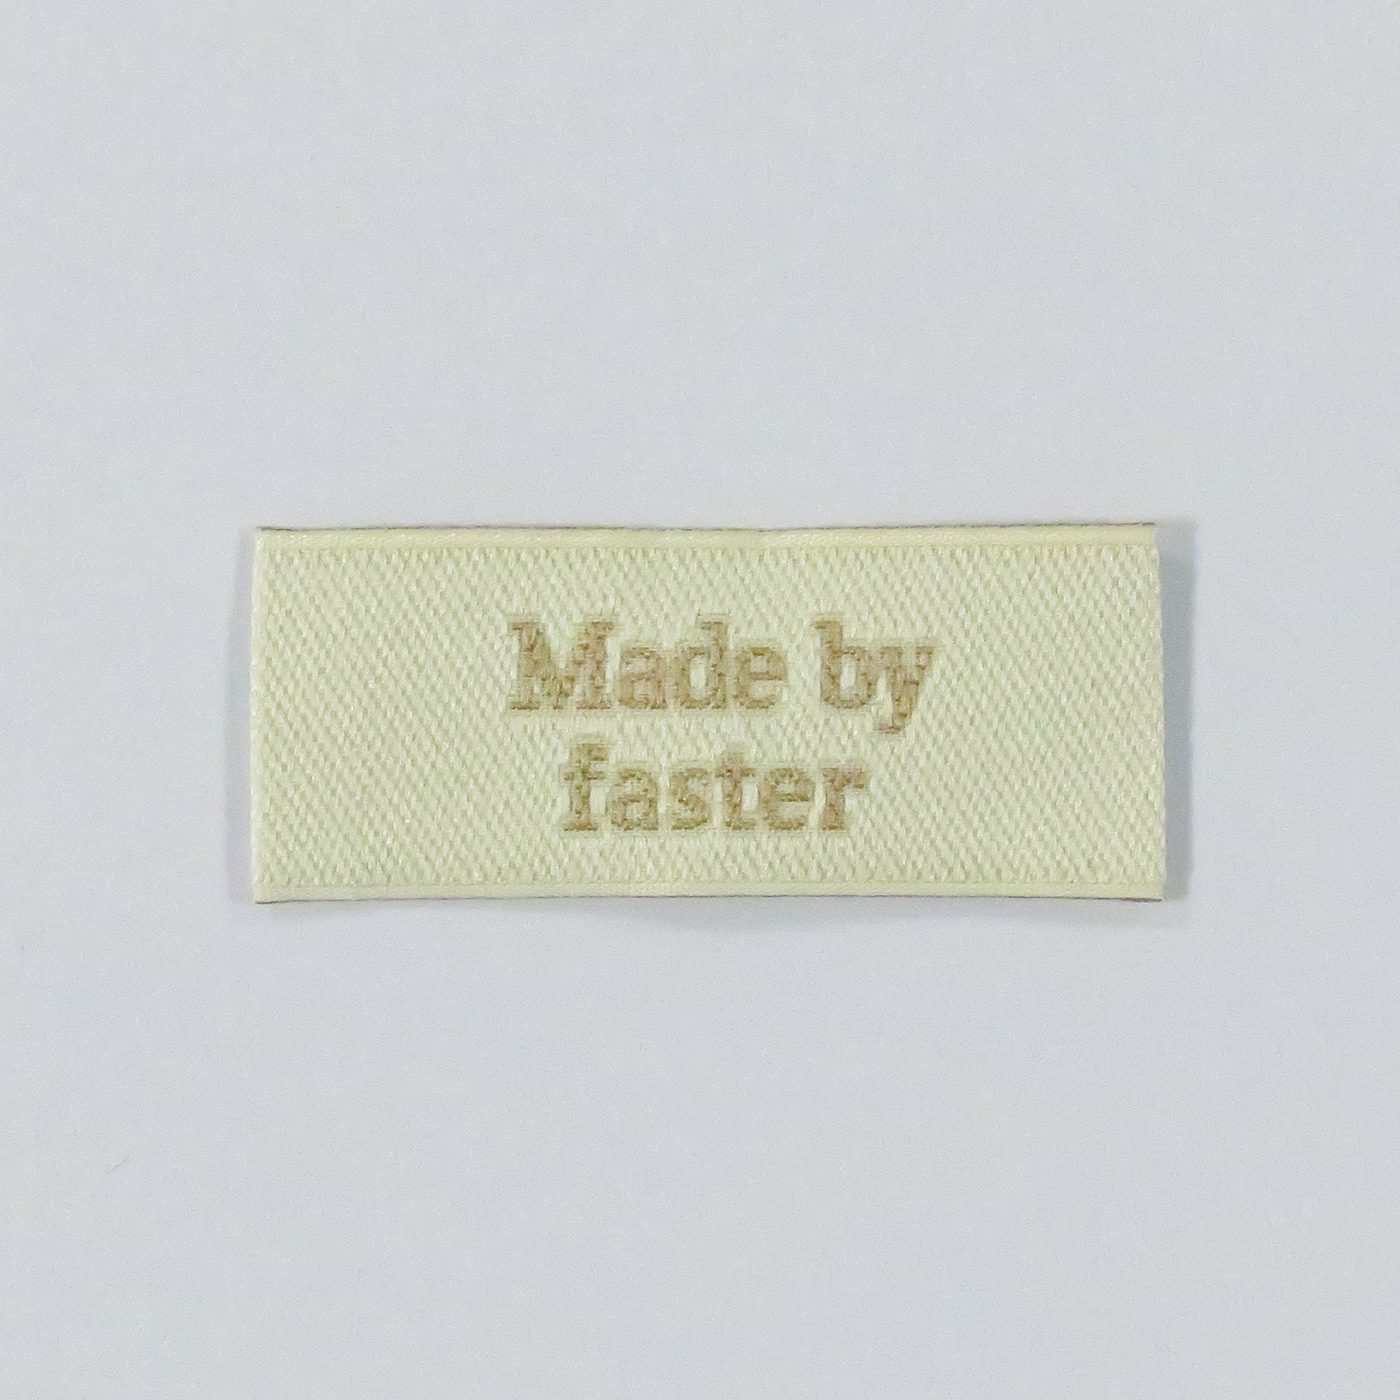 "Made by Faster"